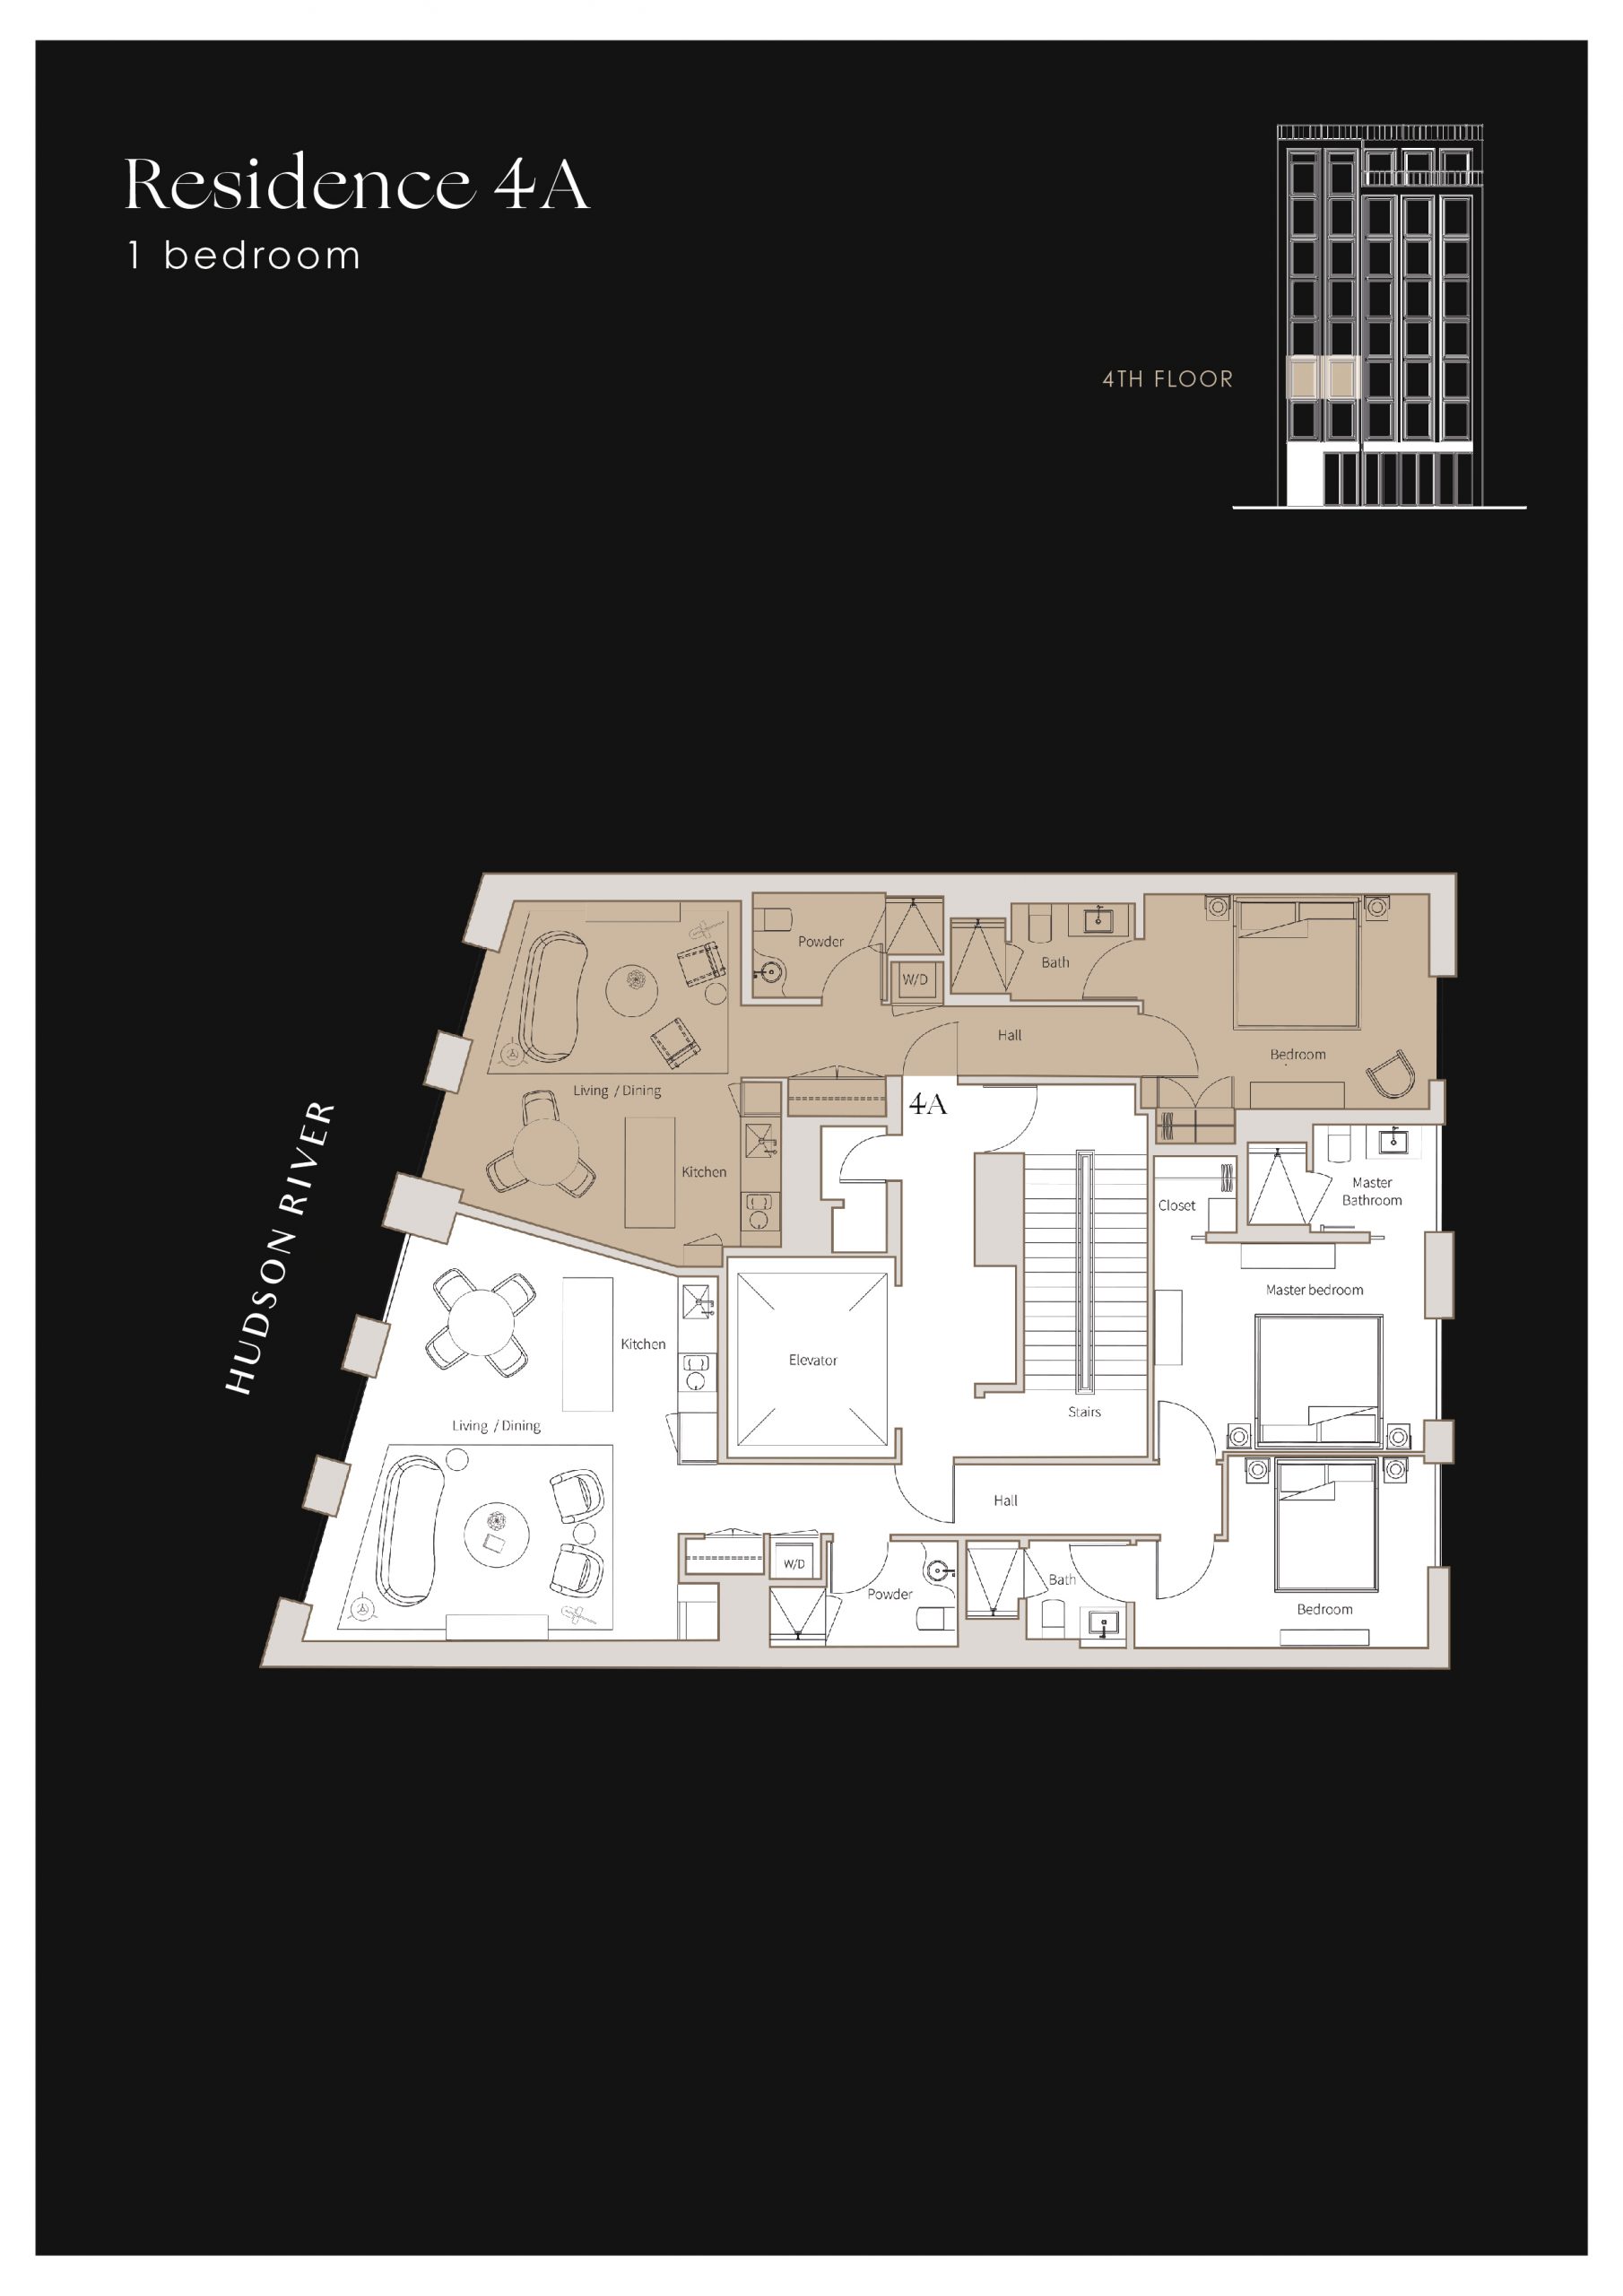 Plan of apartment Residence 4A